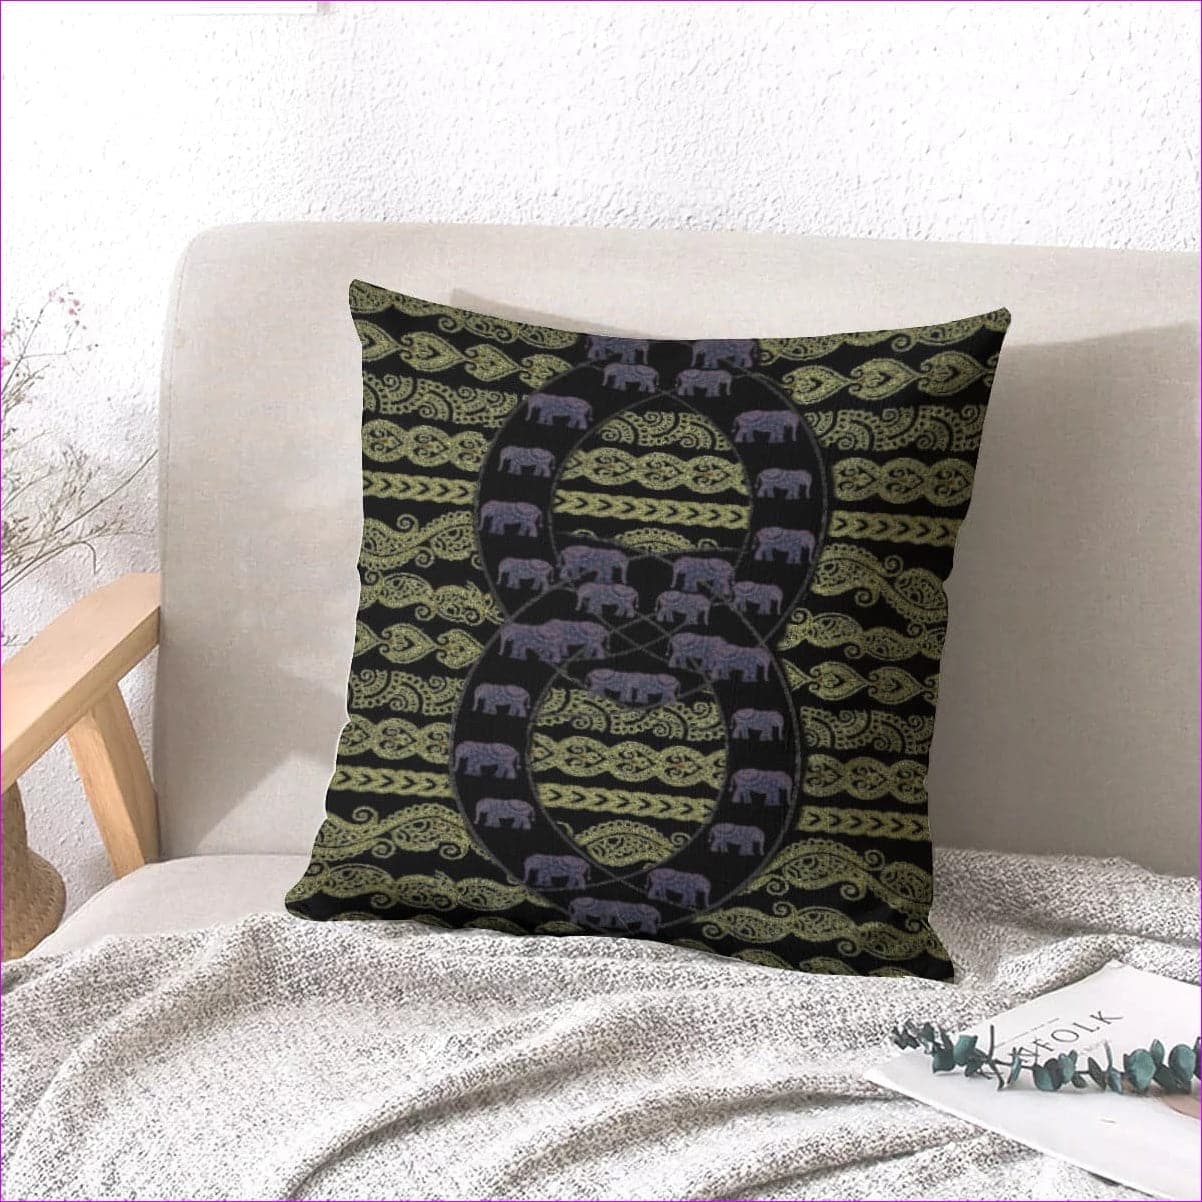 Black Elegant Elephant Couch pillow with pillow Inserts | linen type fabric - couch pillow at TFC&H Co.